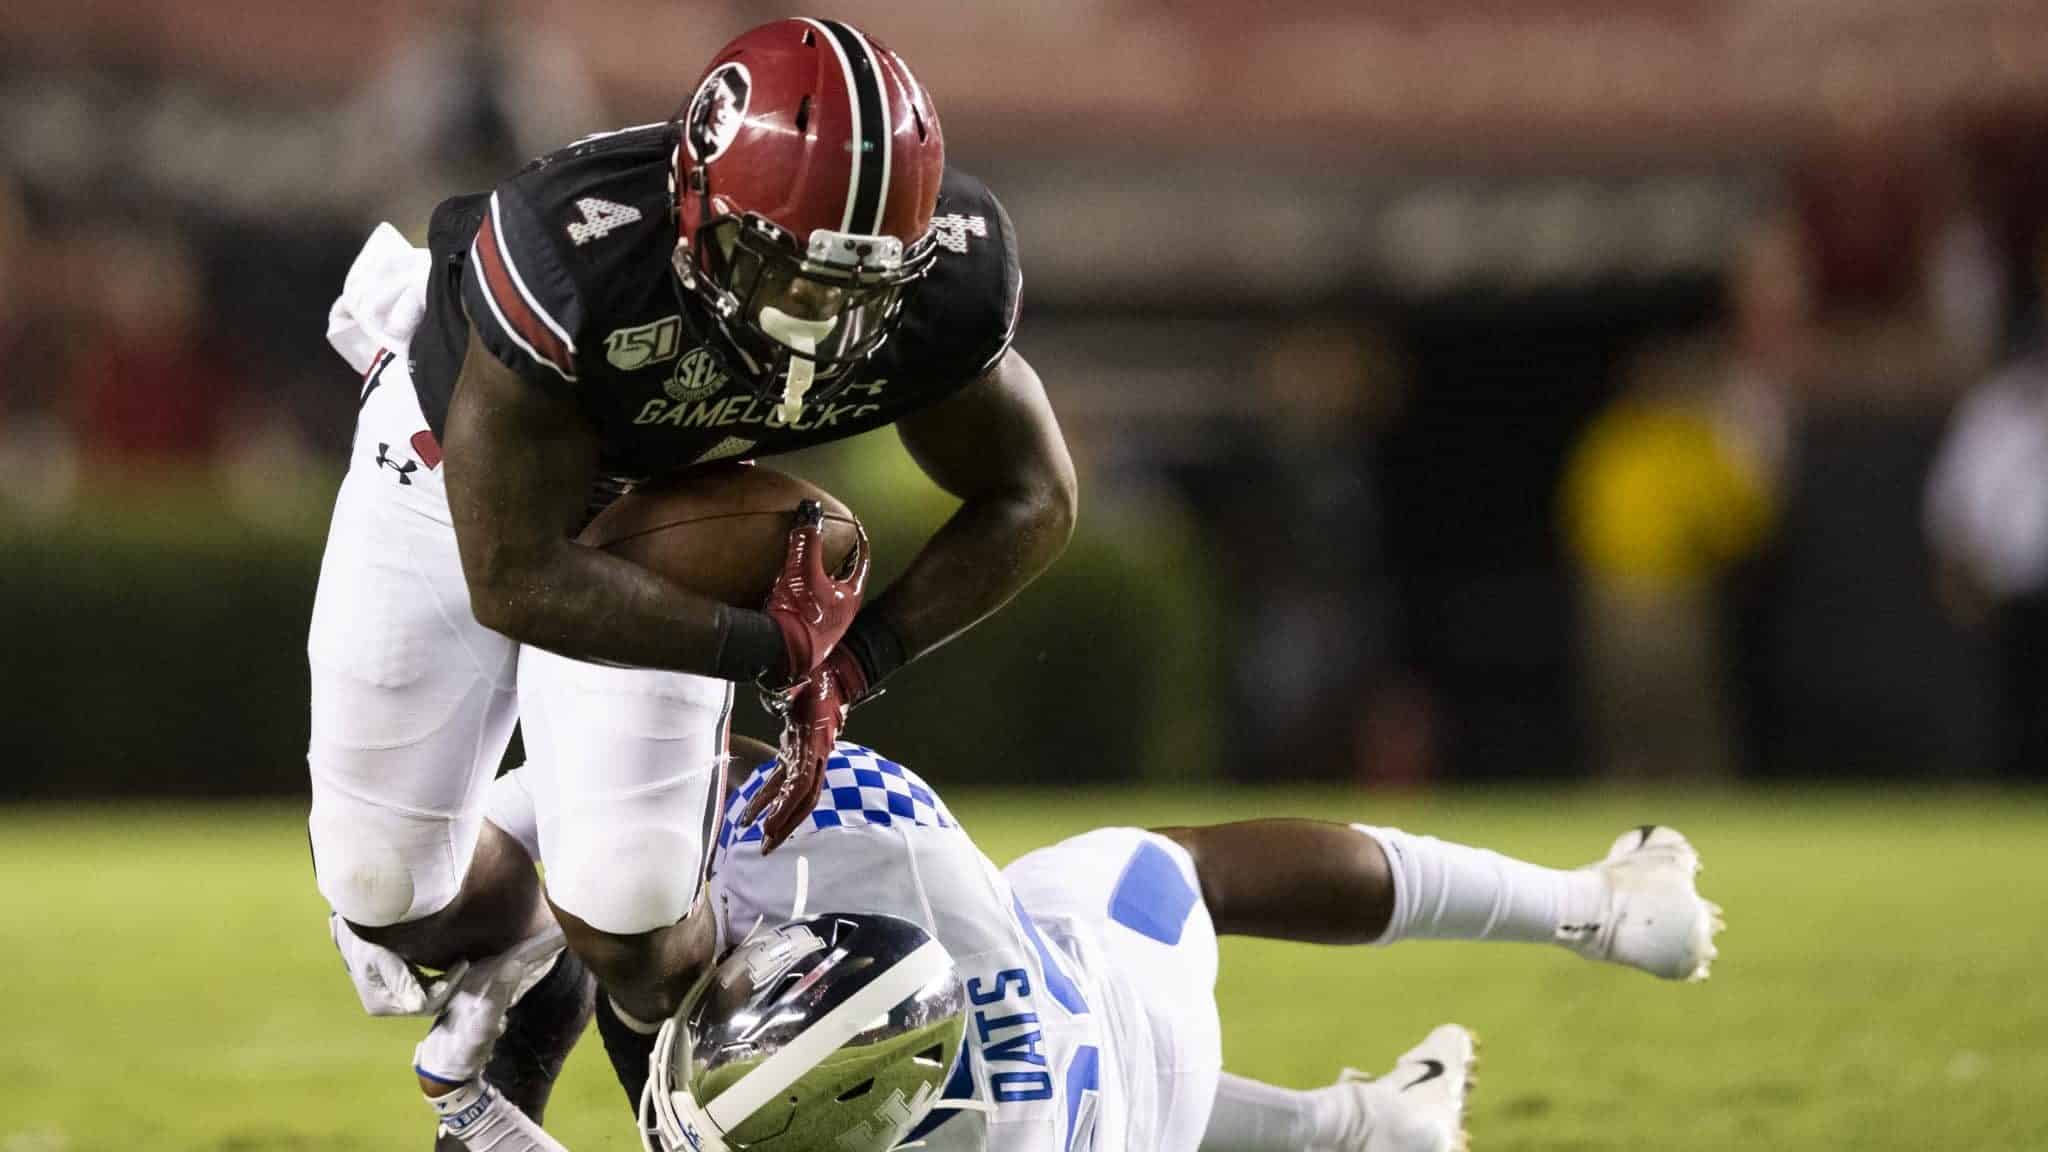 COLUMBIA, SC - SEPTEMBER 28: Tavien Feaster #4 of the South Carolina Gamecocks is tripped up by Chris Oats #22 of the Kentucky Wildcats during the first half of a game at Williams-Brice Stadium on September 28, 2019 in Columbia, South Carolina.